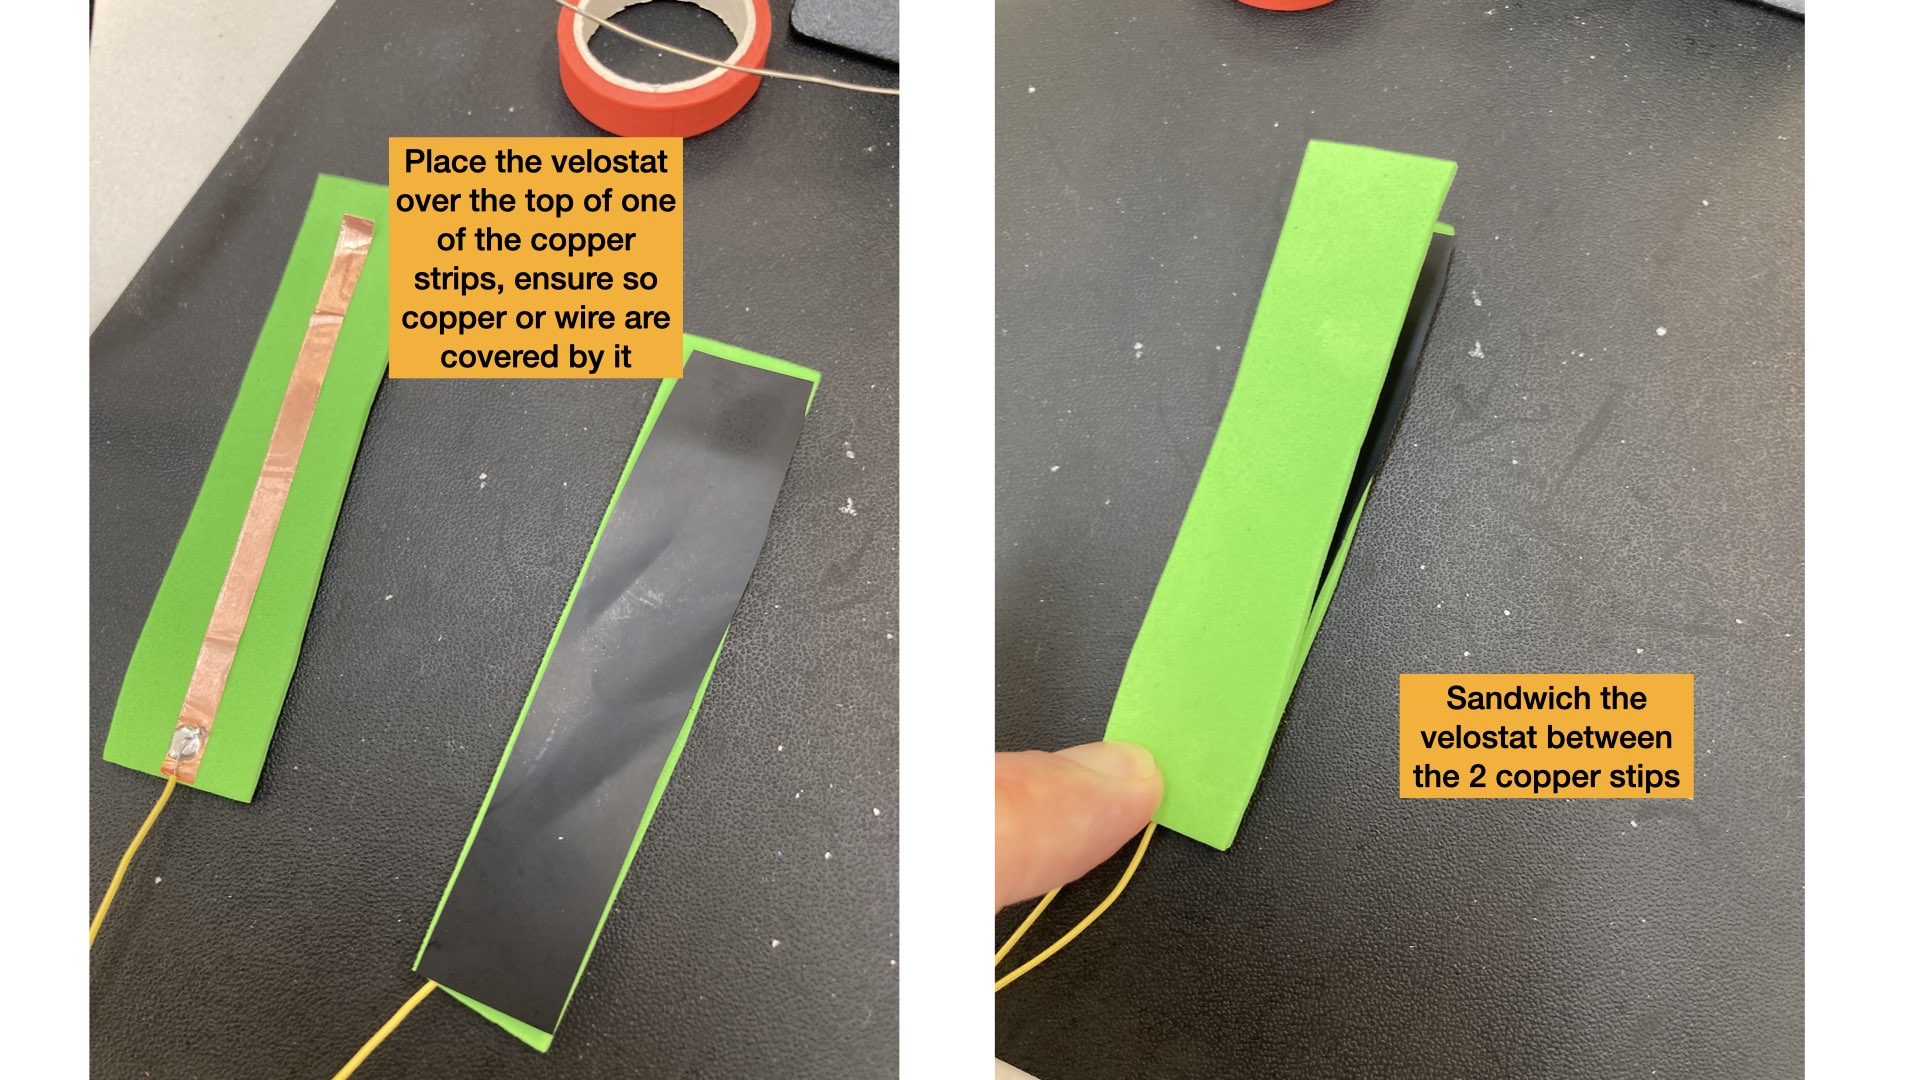 Image shows the sandwhiching of the velostat between the 2 copper stips and foam